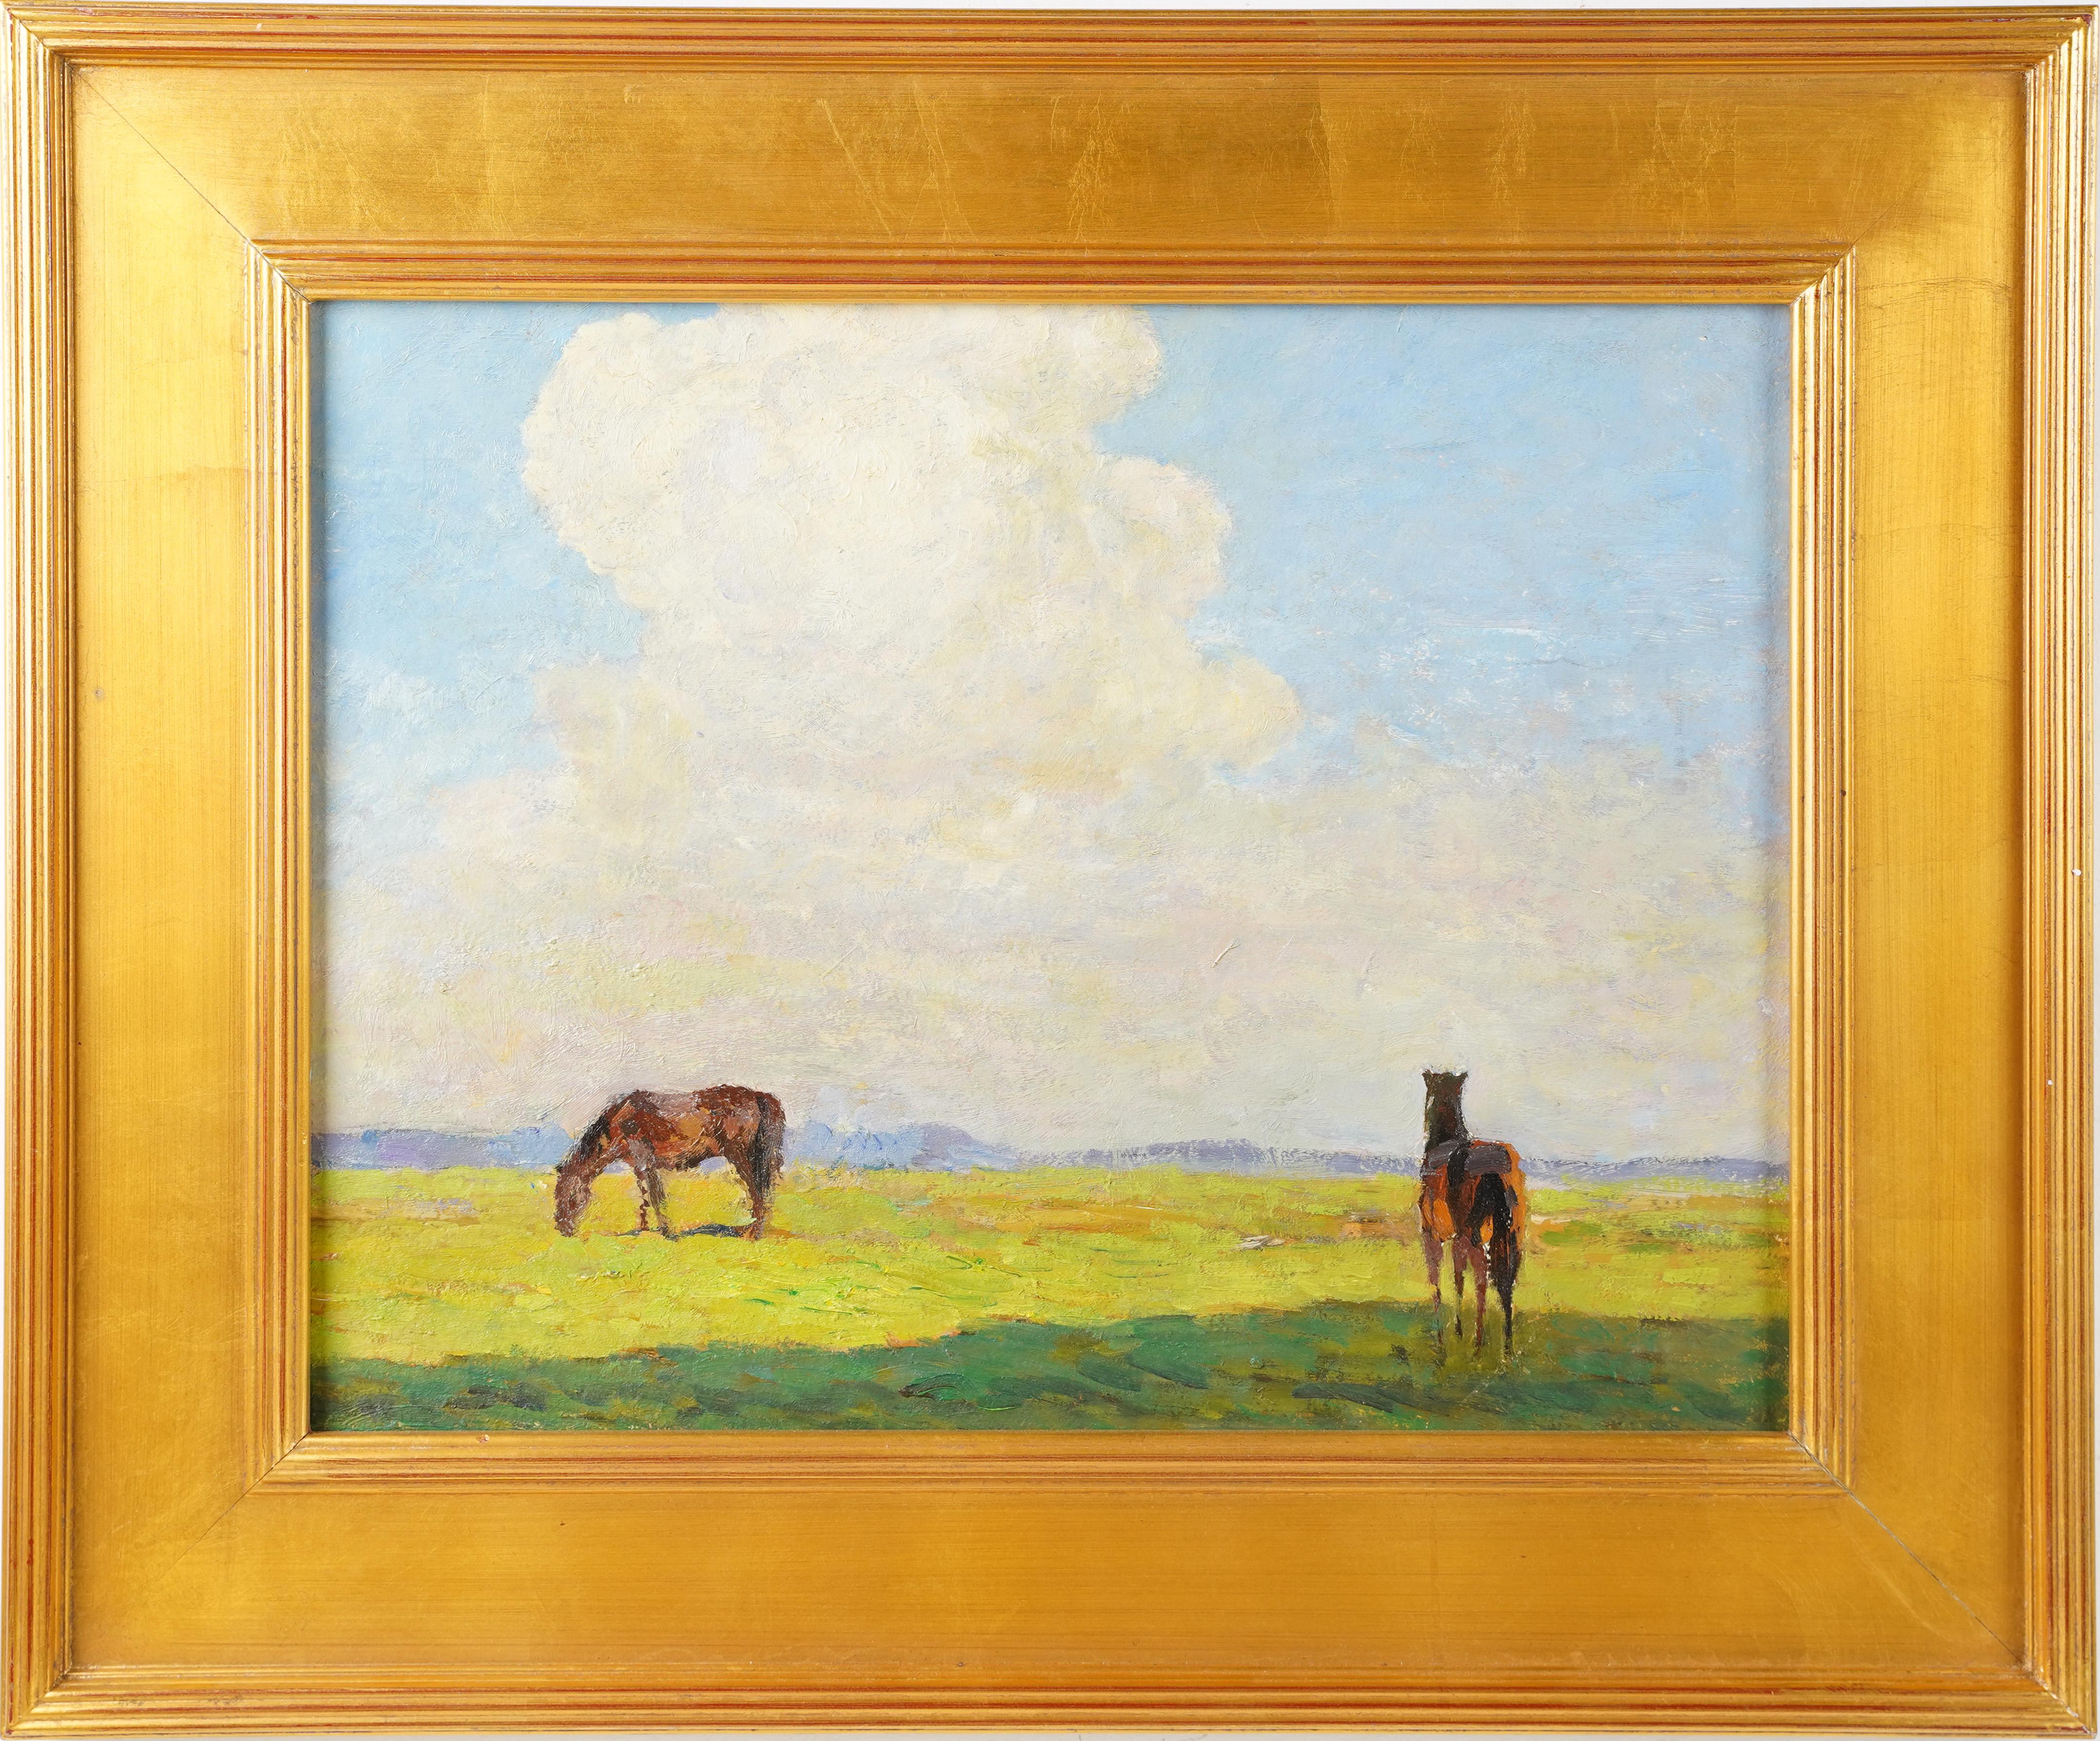 Antique American Impressionist Summer Horse Grazing Landscape Oil Painting - Orange Landscape Painting by Unknown